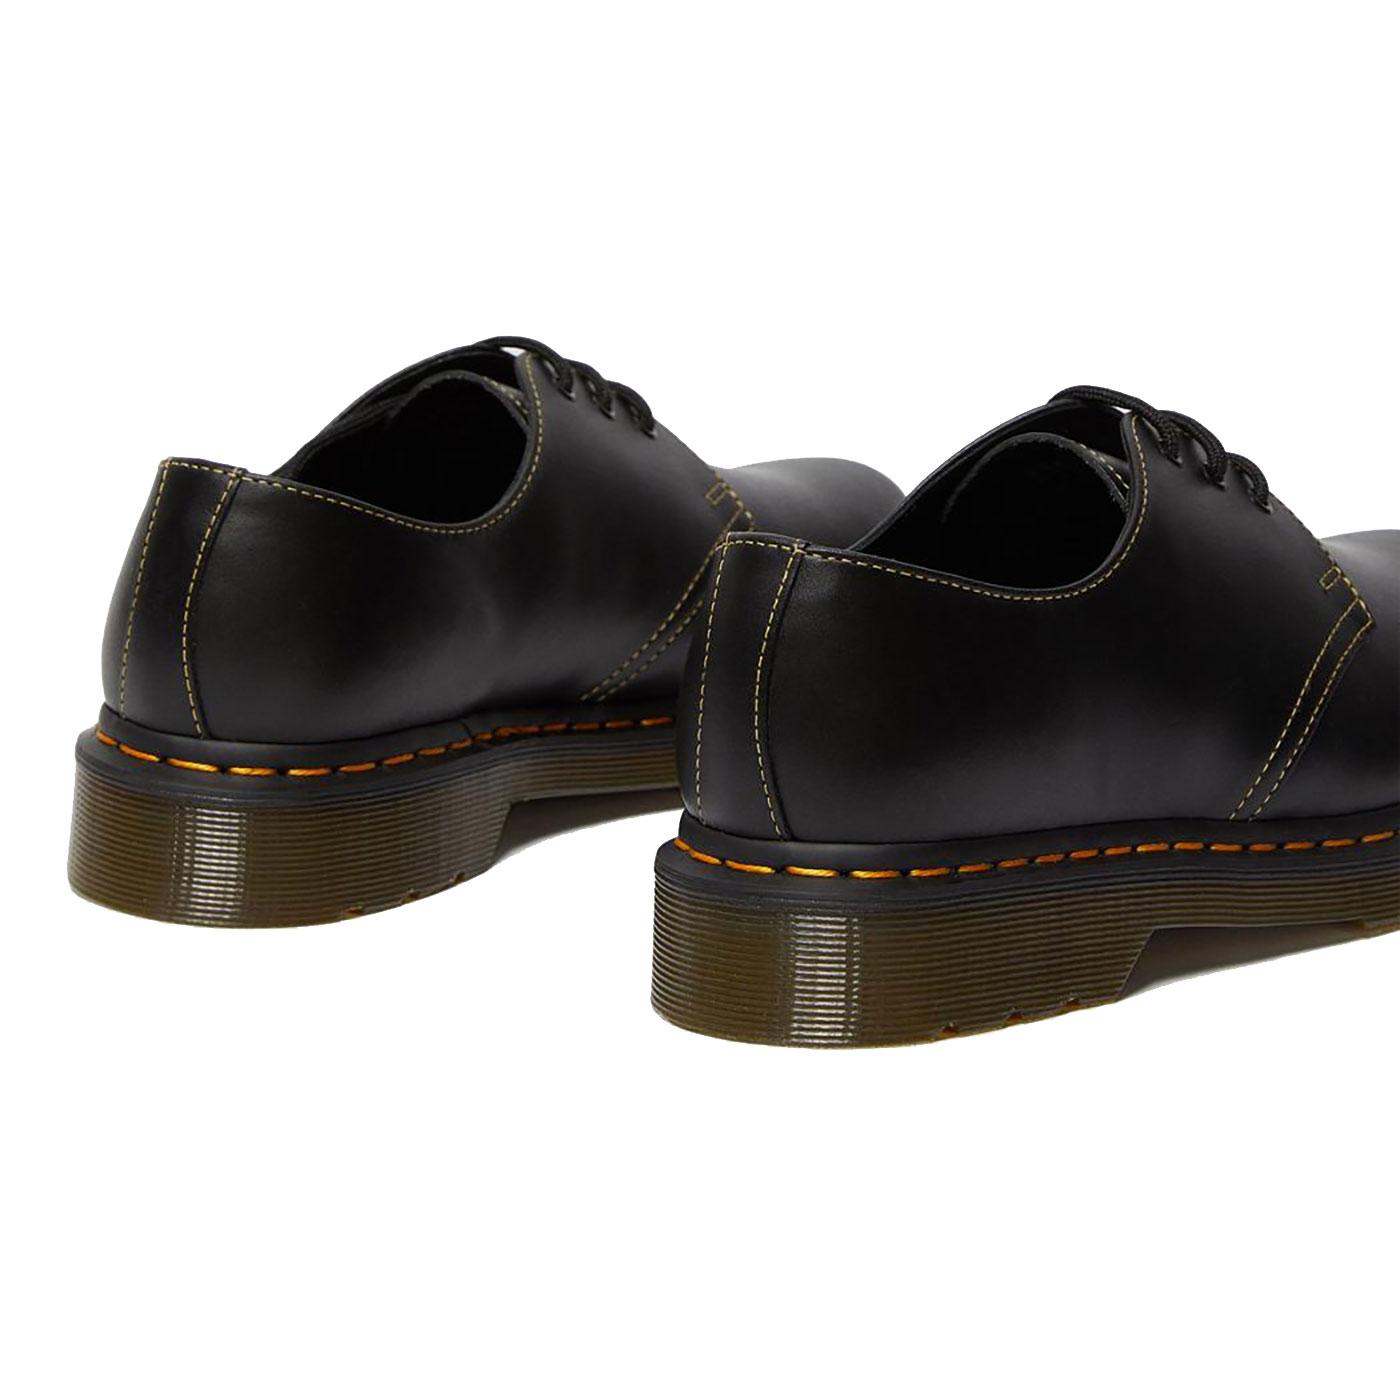 DR MARTENS '1461' Atlas Leather Oxford Shoes in Dark Grey